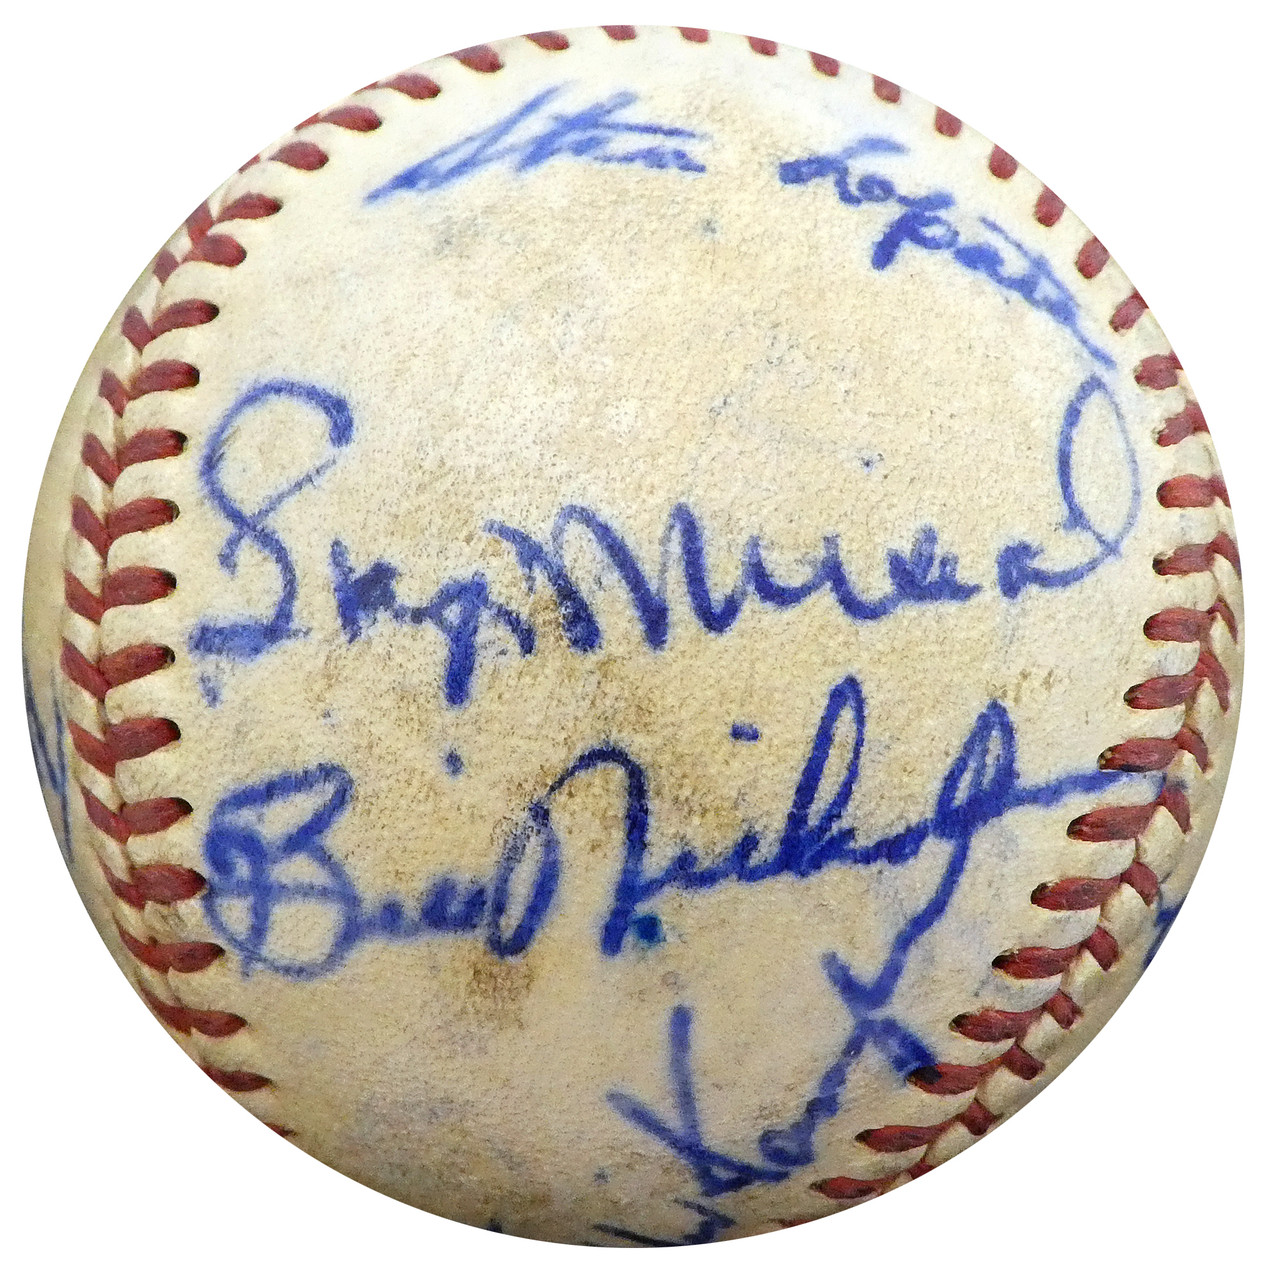 1950 Spring Training Autographed Official Baseball With 20 Total